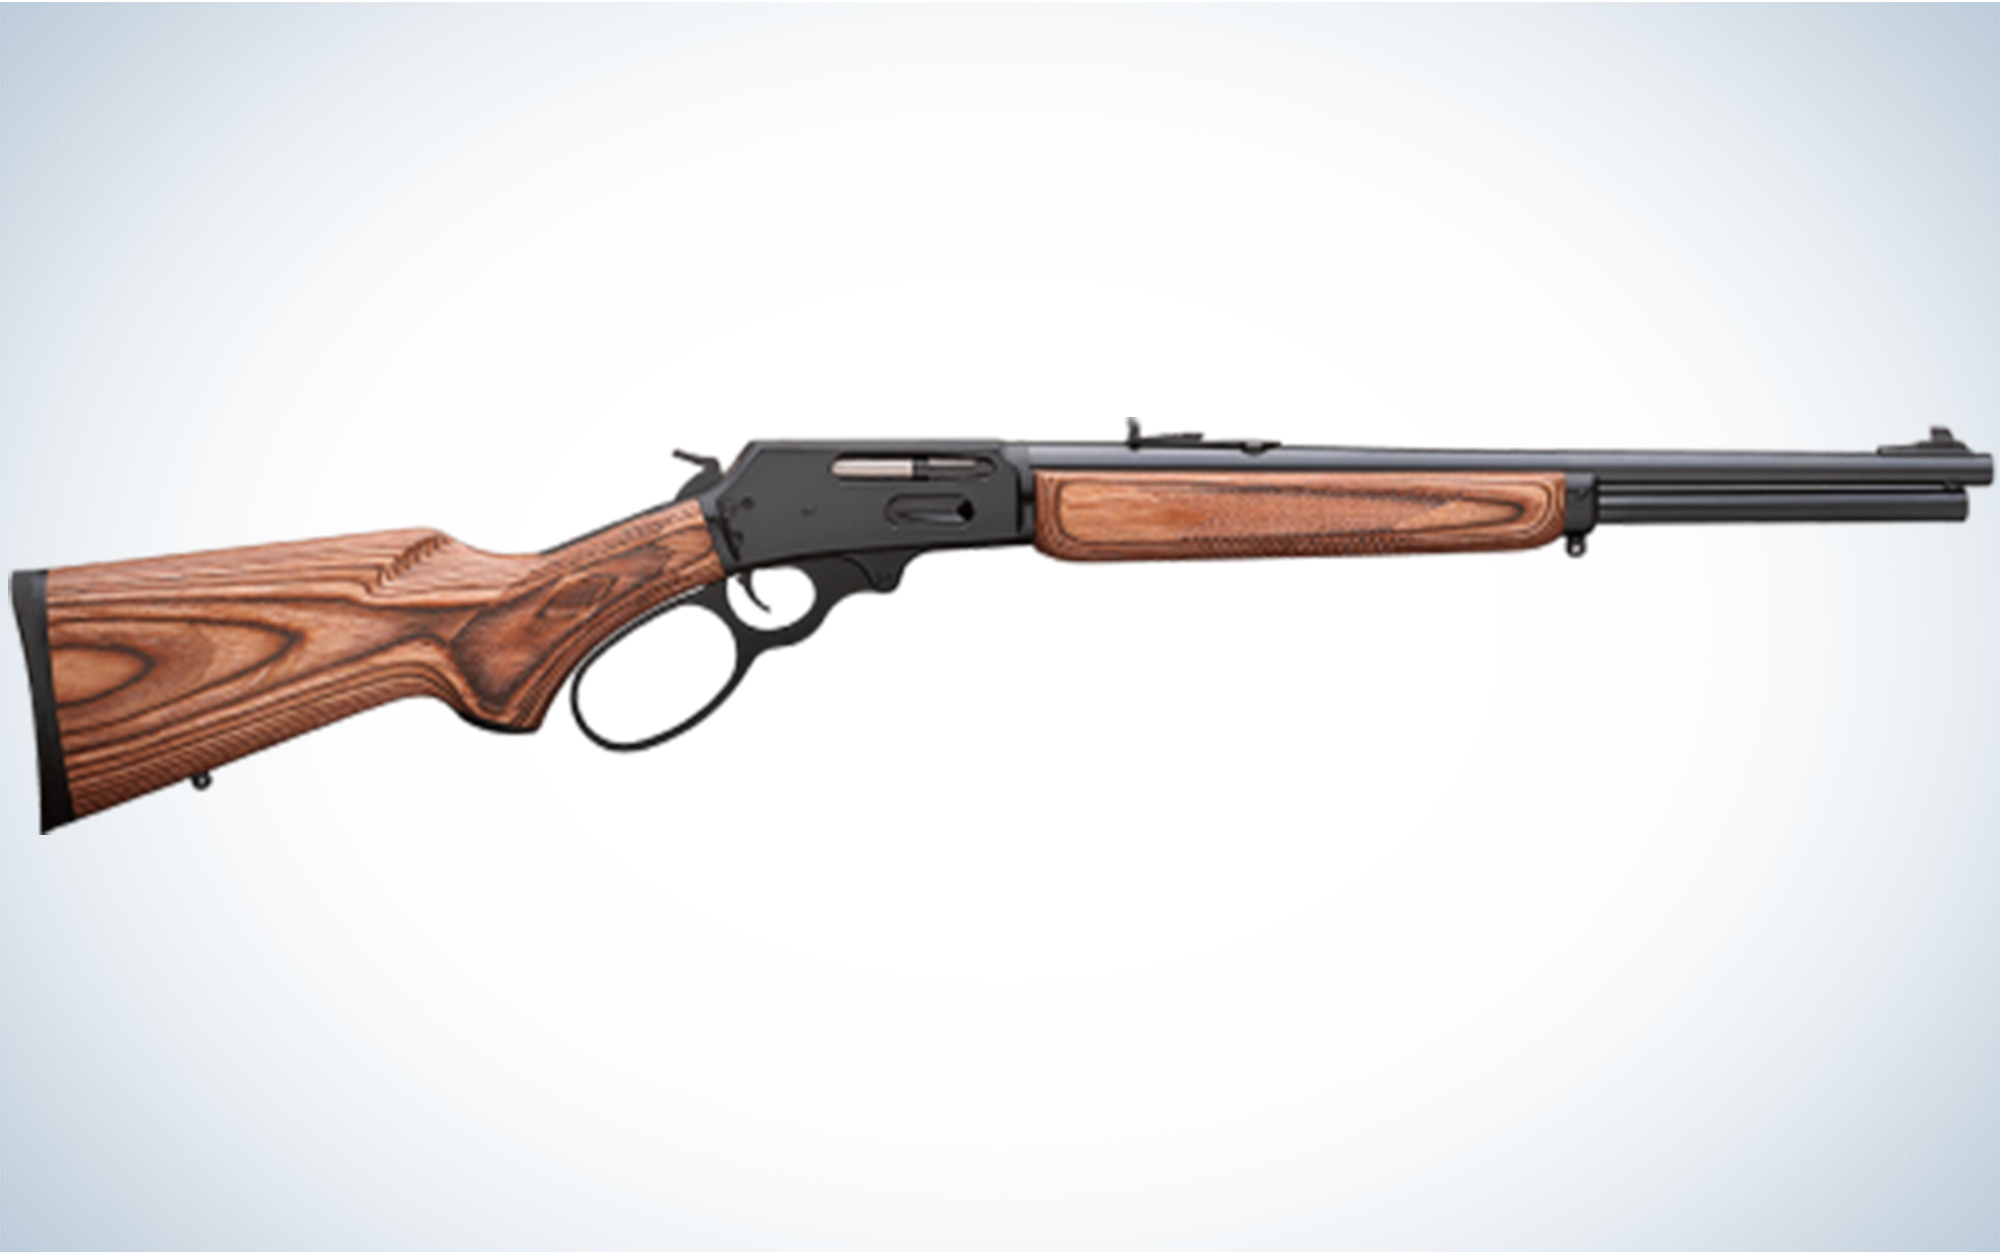 The Marlin 336 is one of the best lever actions.